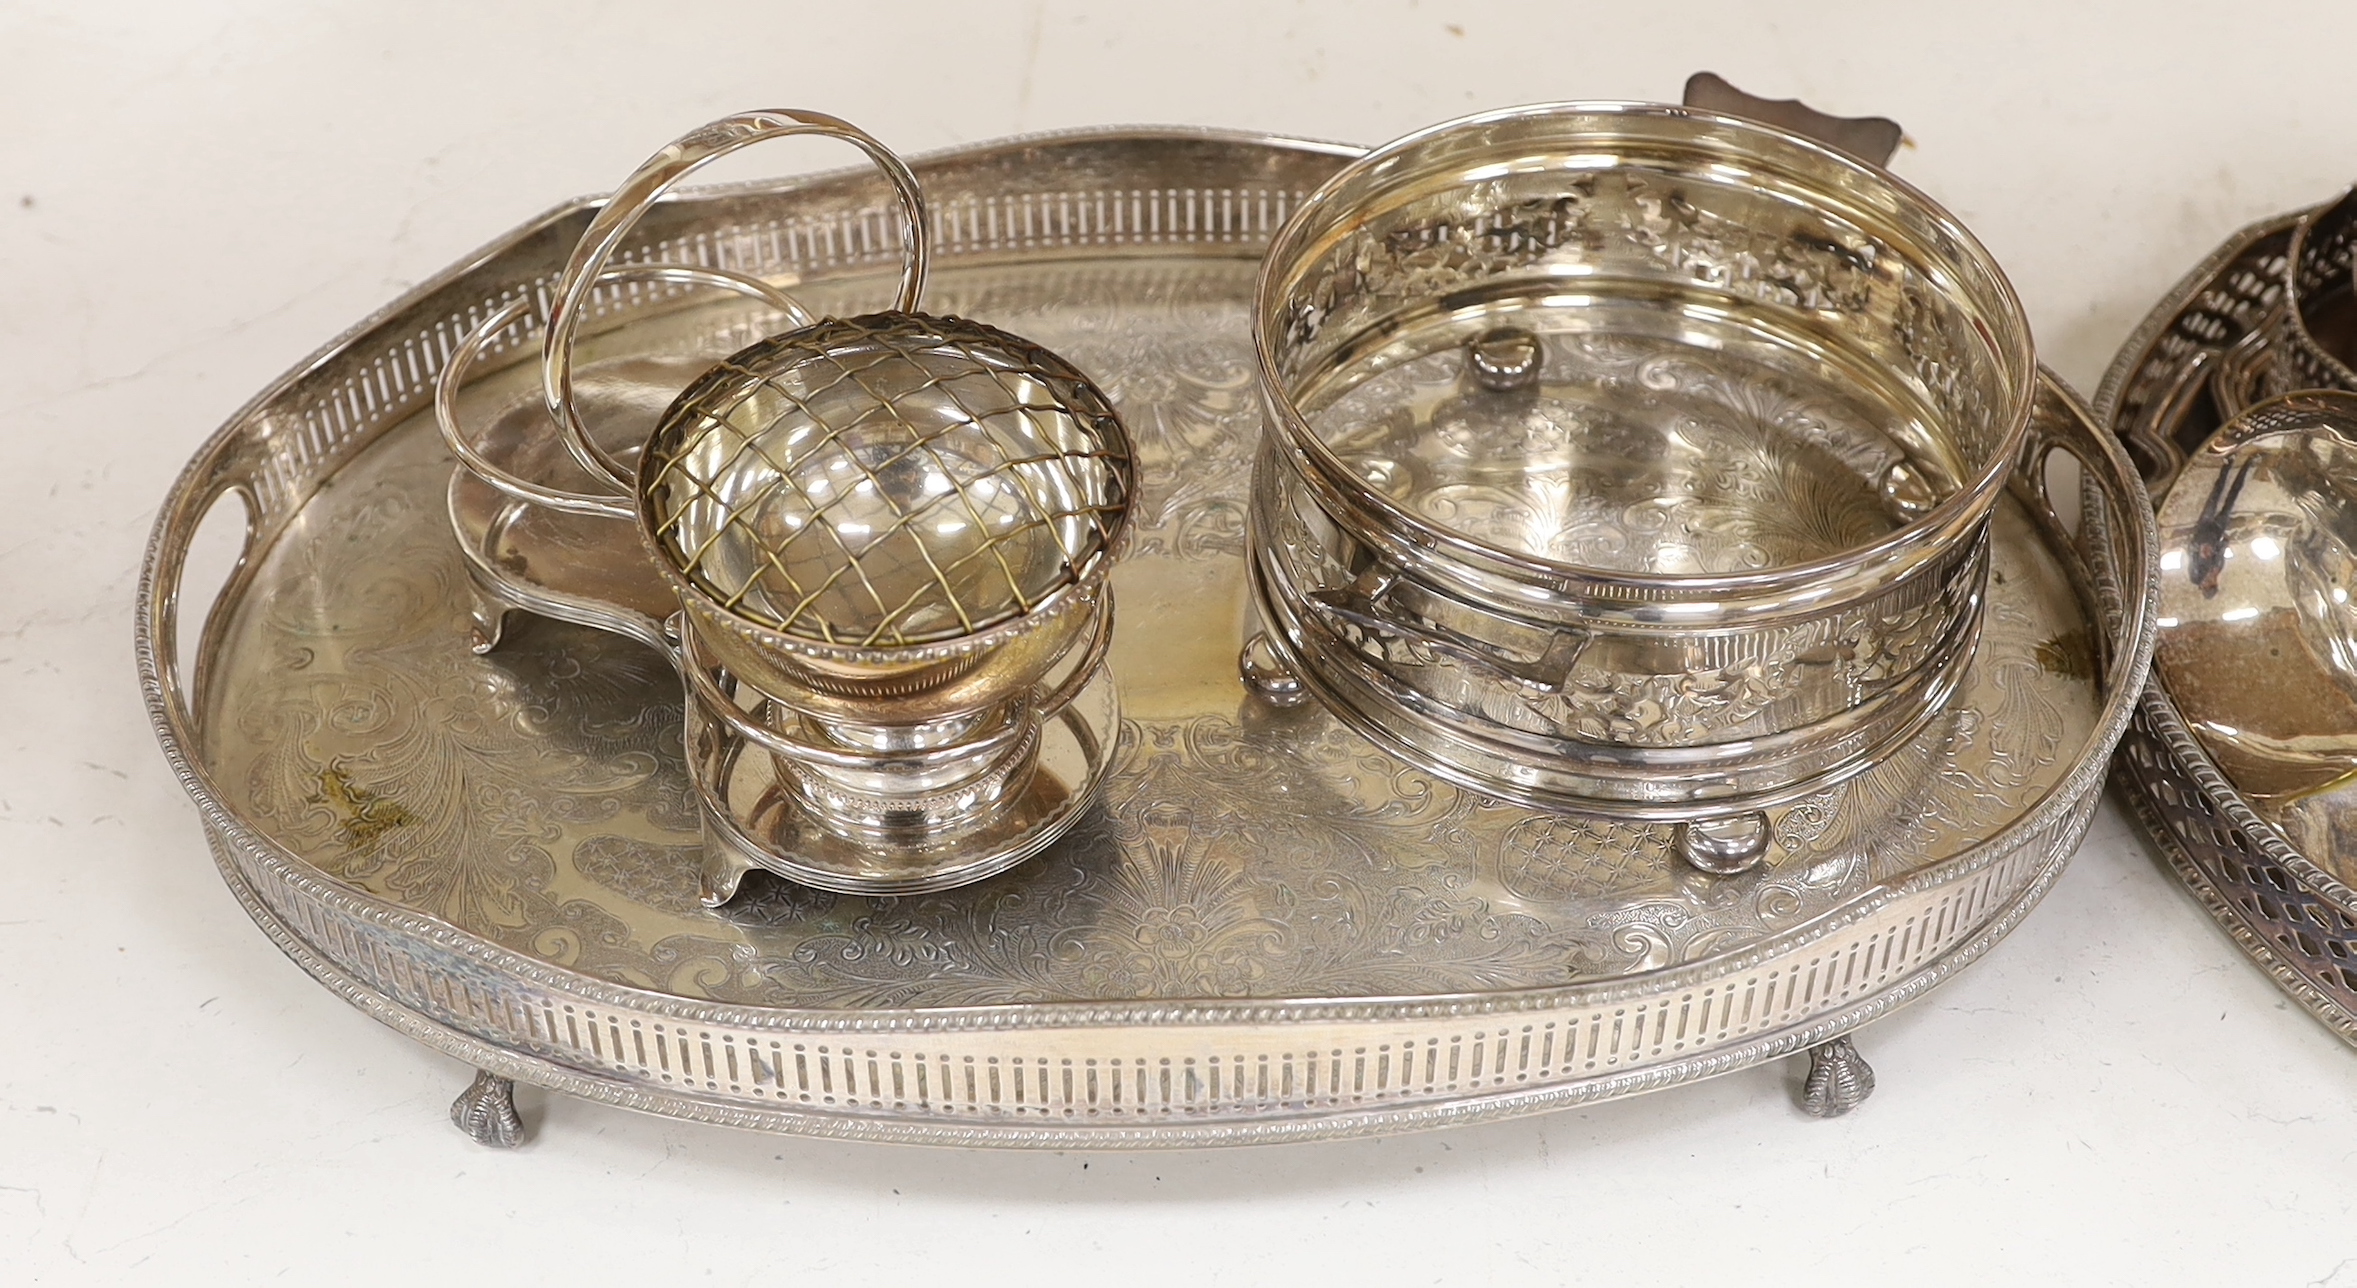 A quantity of silver plate including two trays with pierced galleries, a wine coaster, condiment serving pots, etc.